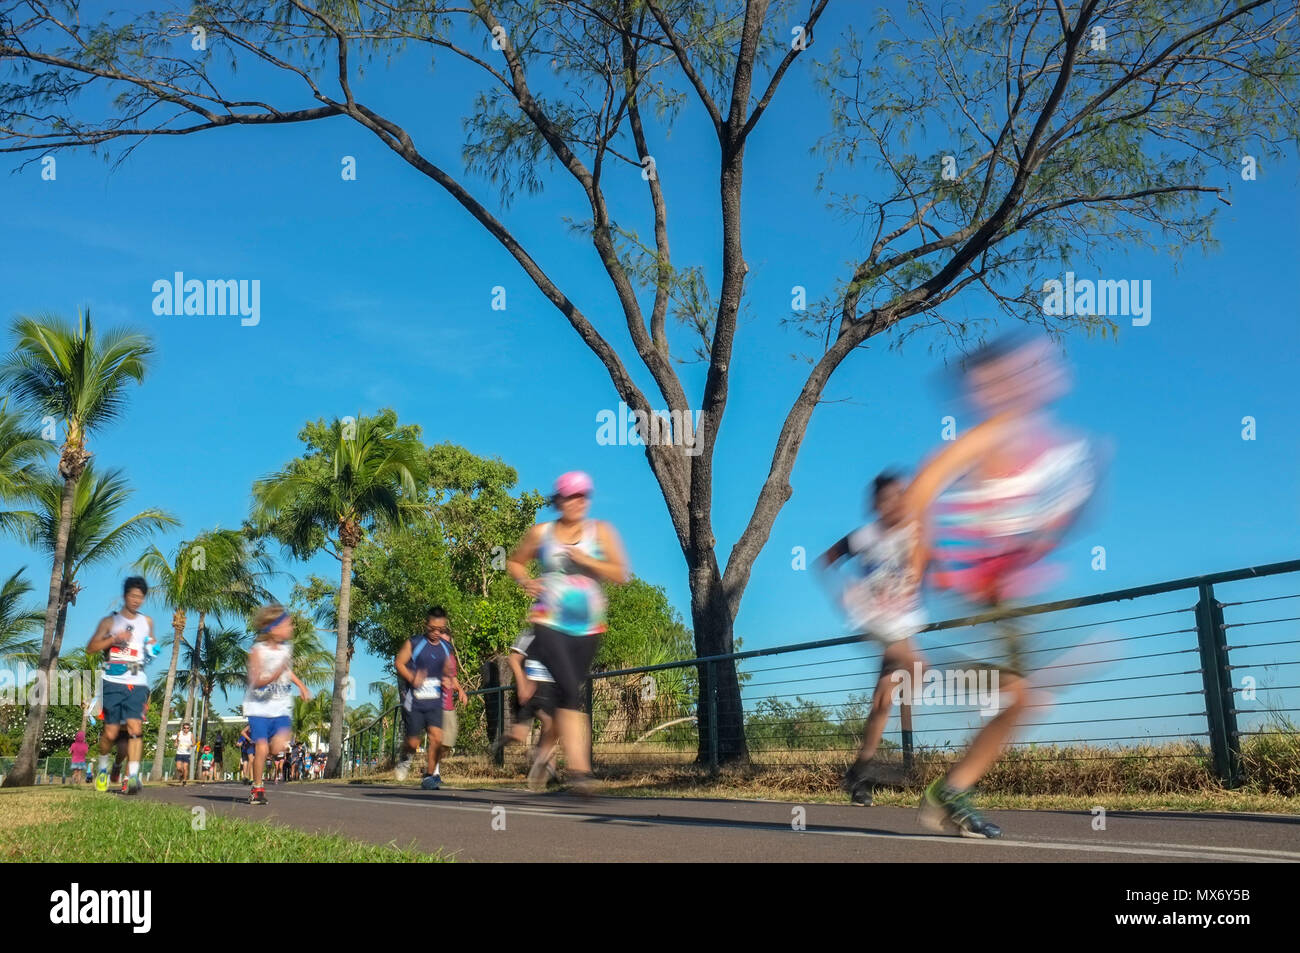 People taking part in the 12 km fun run City 2 Surf on the Nightcliff foreshore in Darwin, Northern Territory, Australia. With motion blur. Stock Photo